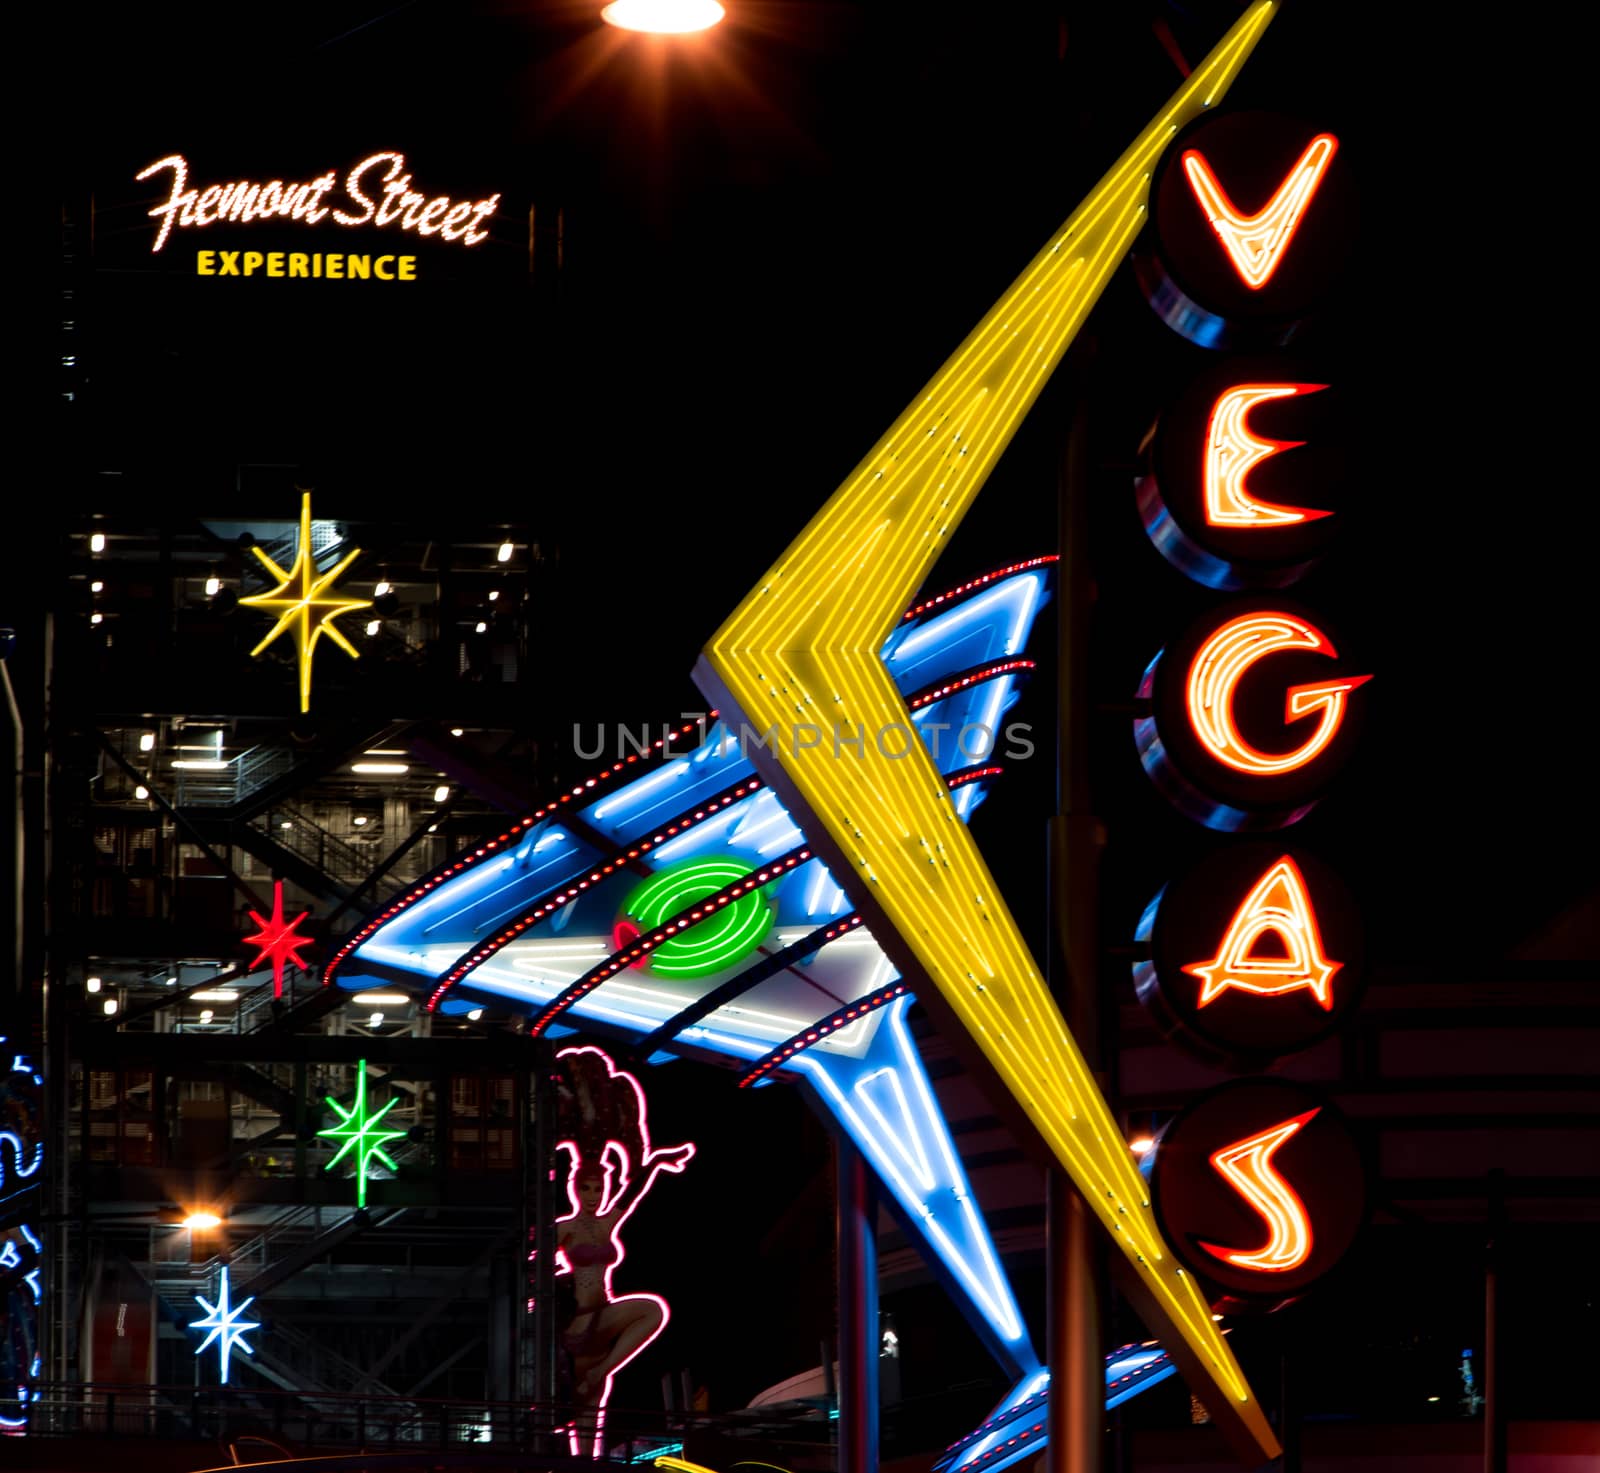 Fremont Street Experience Entrance and Lights by wolterk